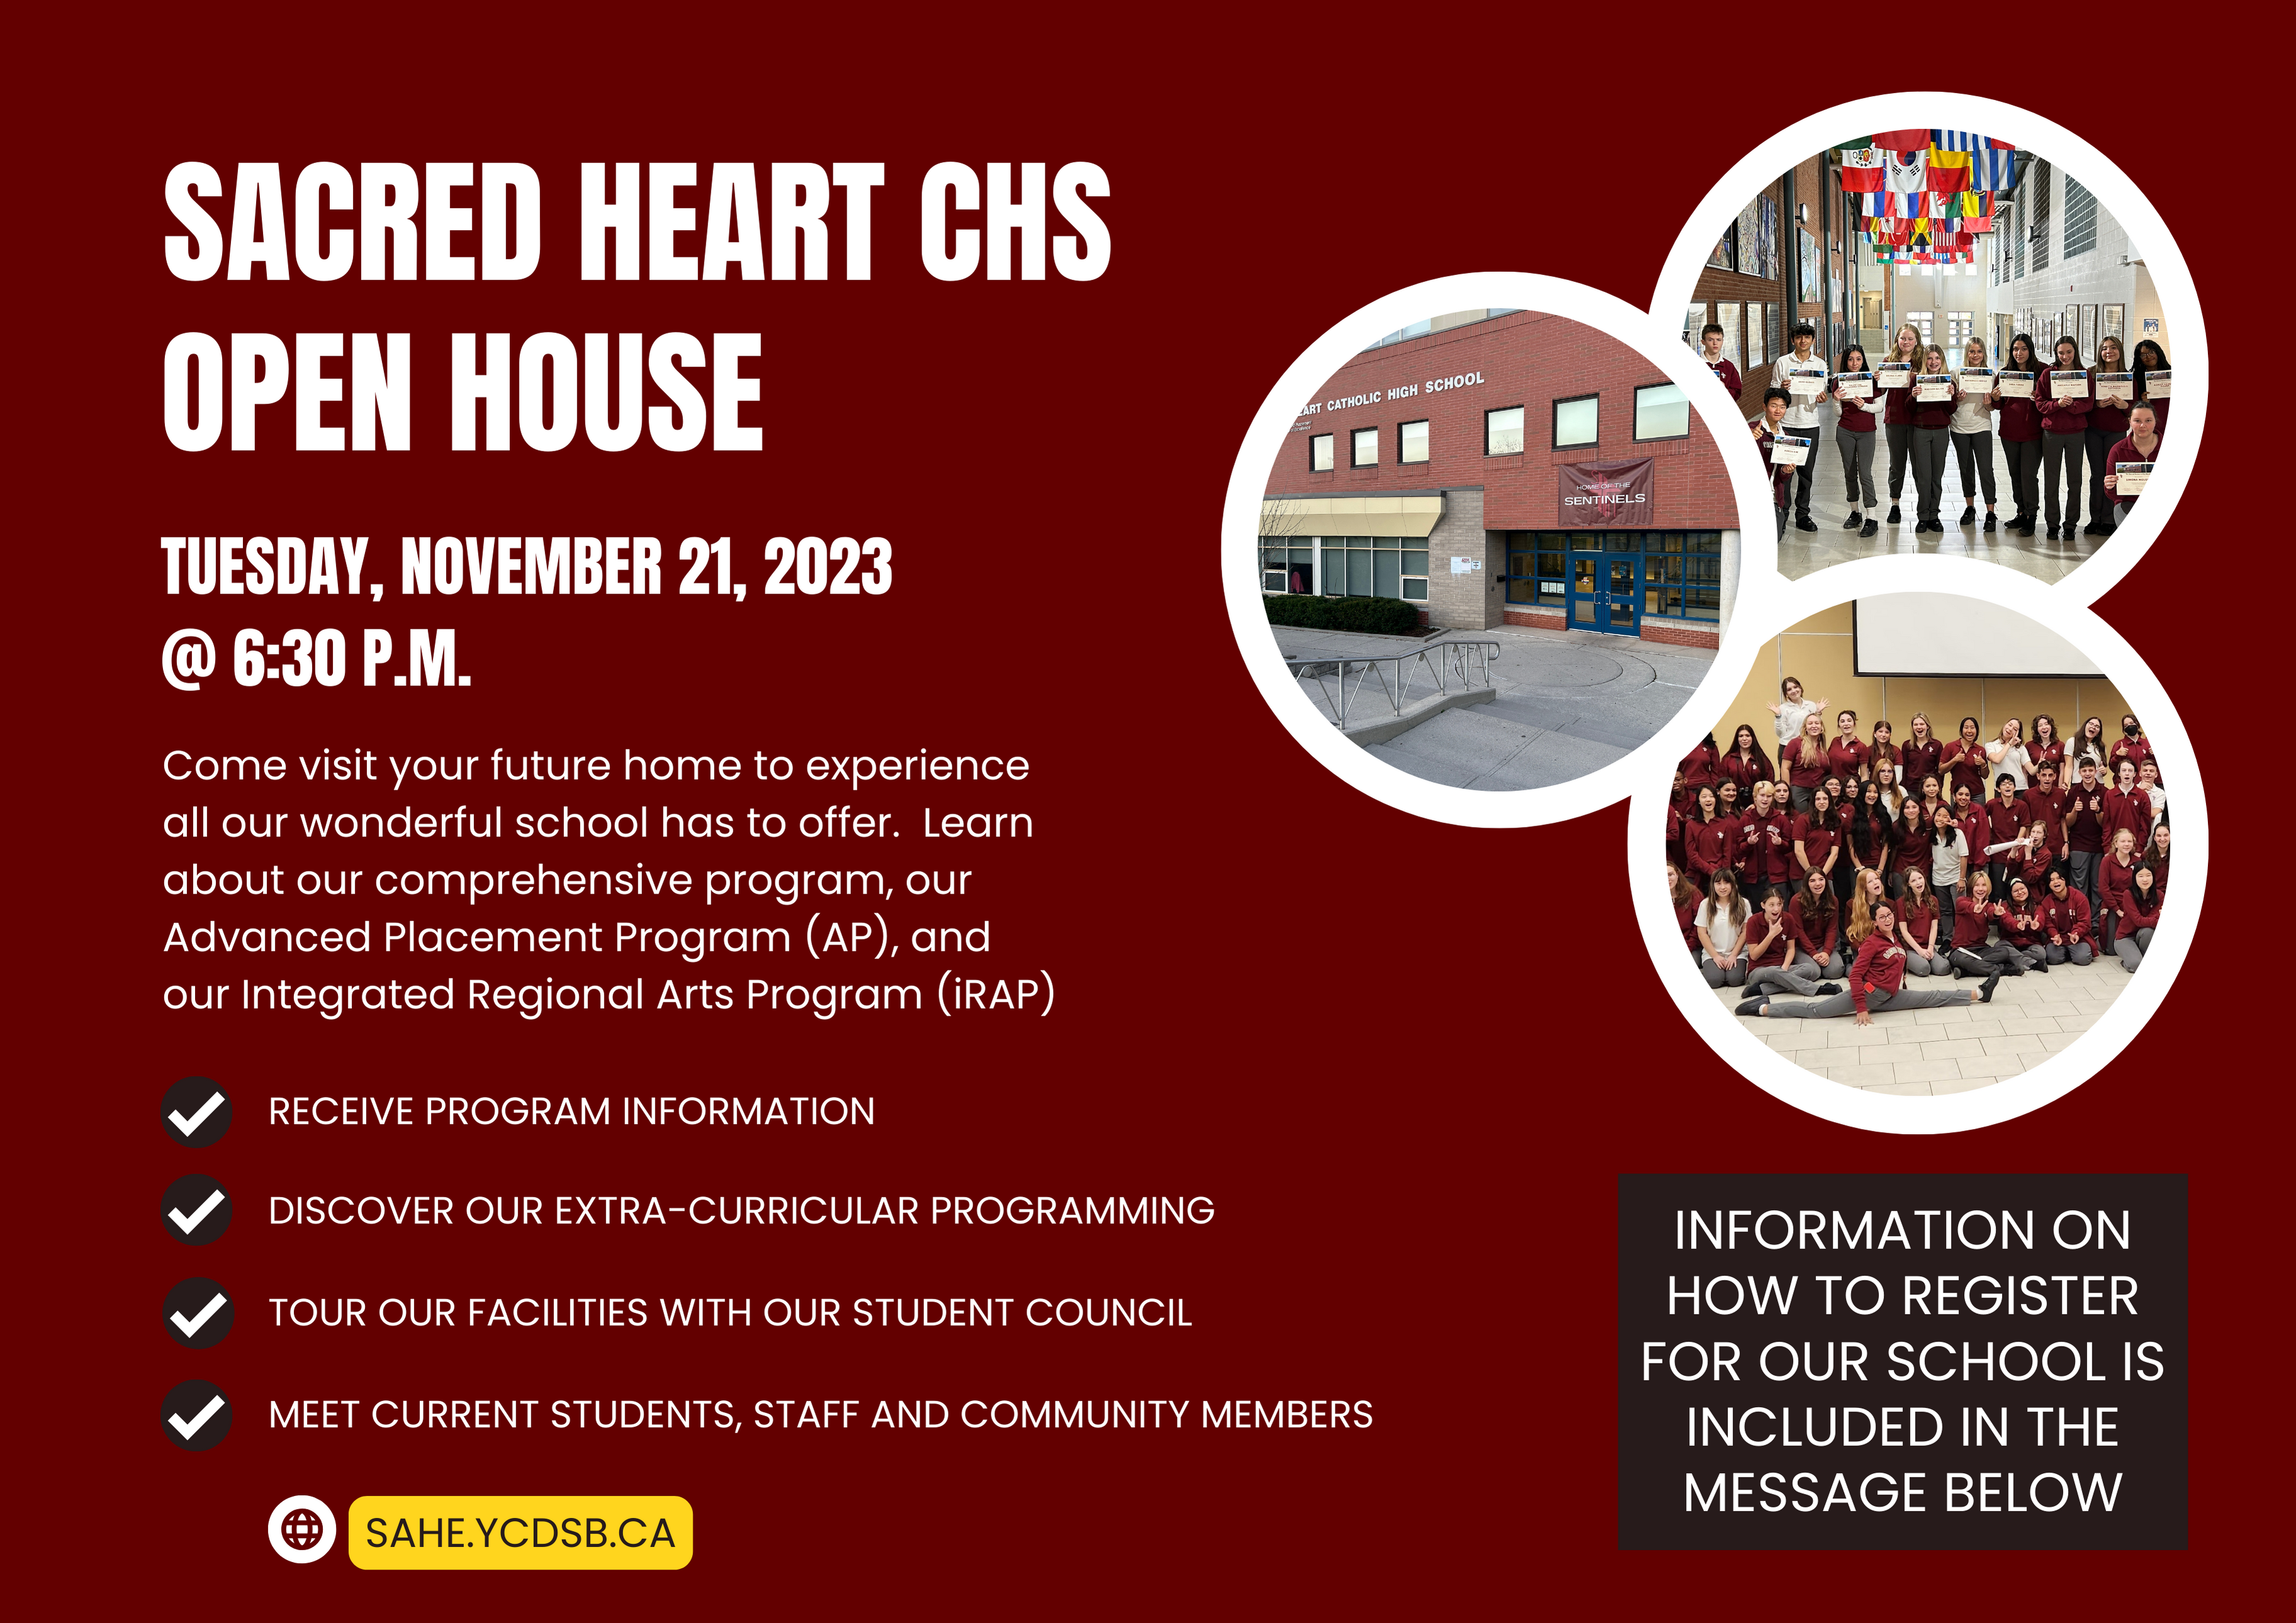 WELCOMING NEW SENTINELS! TIME TO REGISTER FOR SACRED HEART CHS FOR 2024-2025